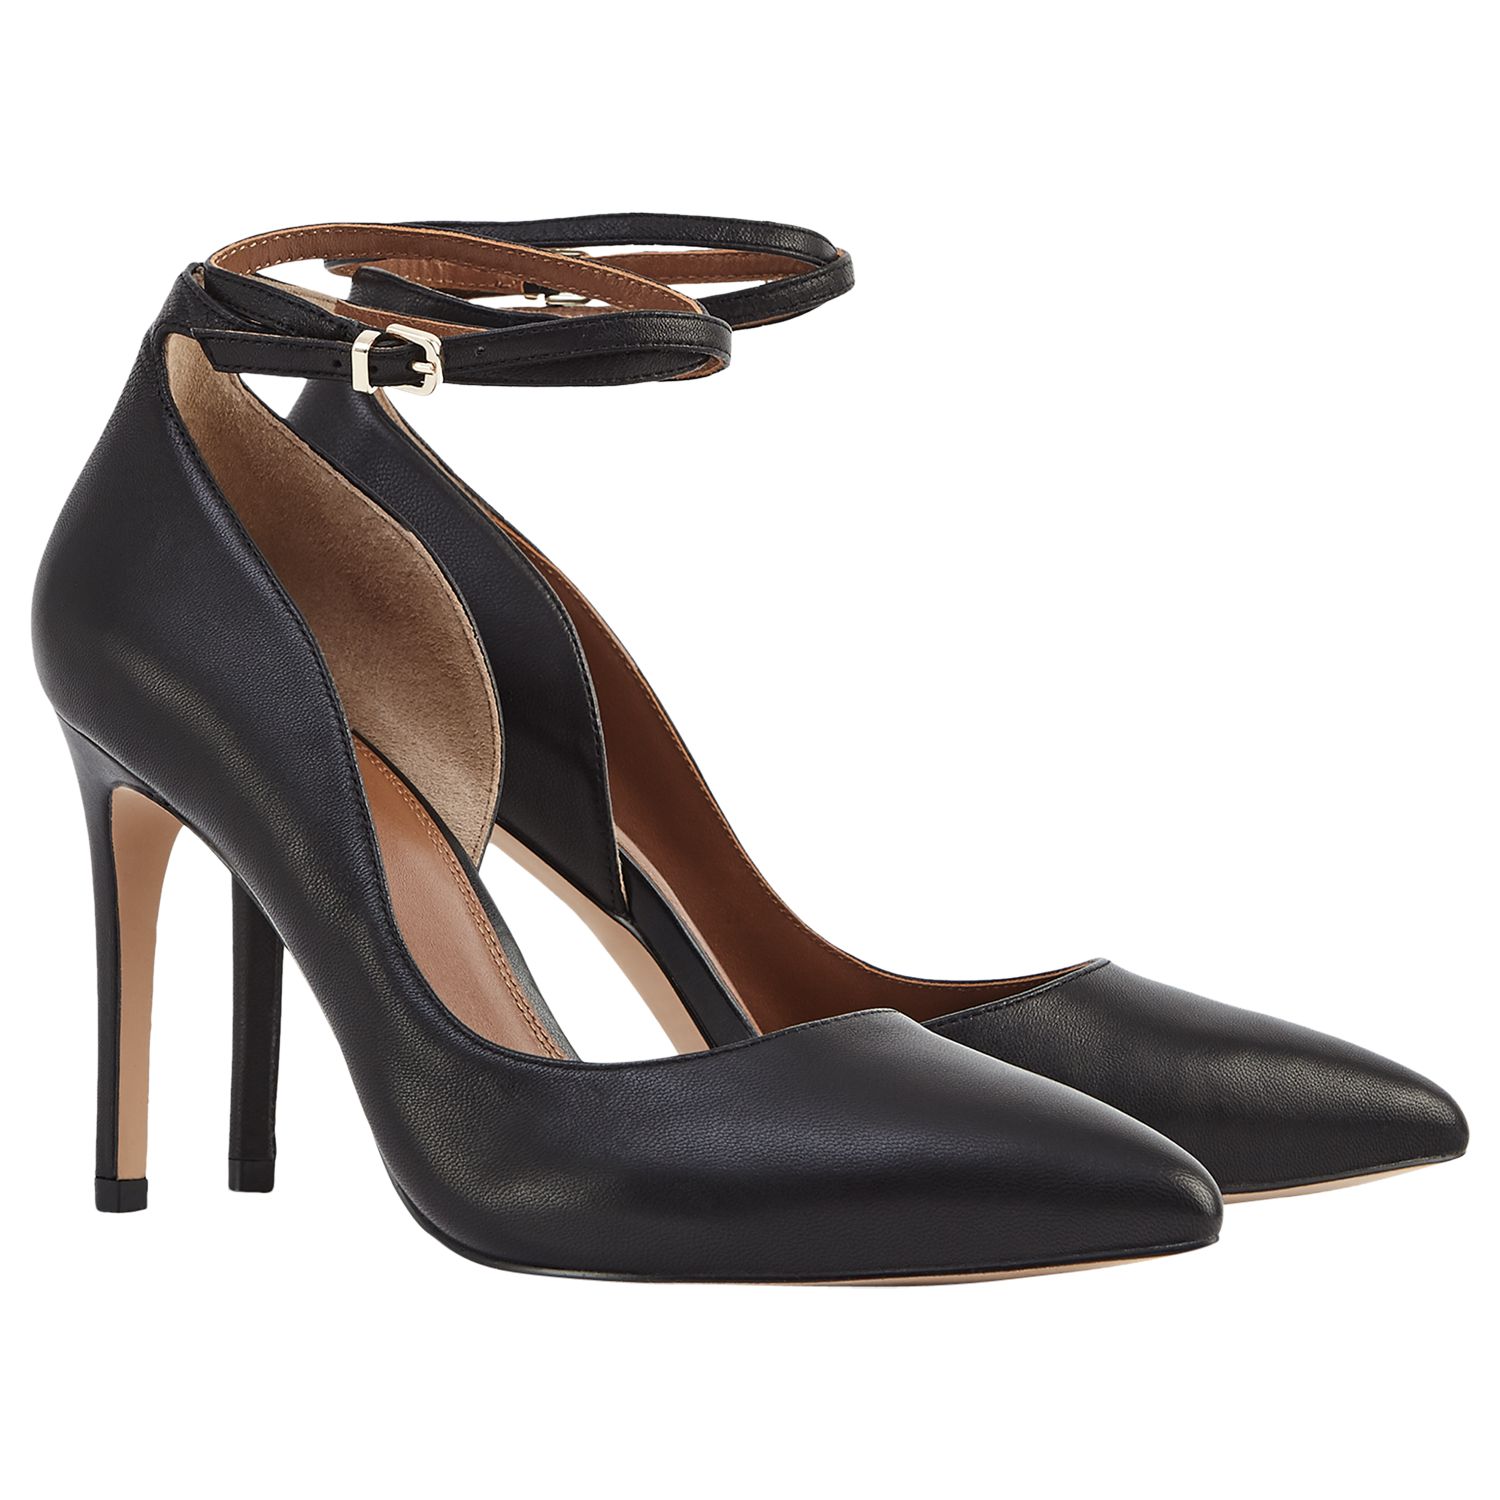 Reiss Lya Leather Ankle Strap Shoes, Black at John Lewis & Partners